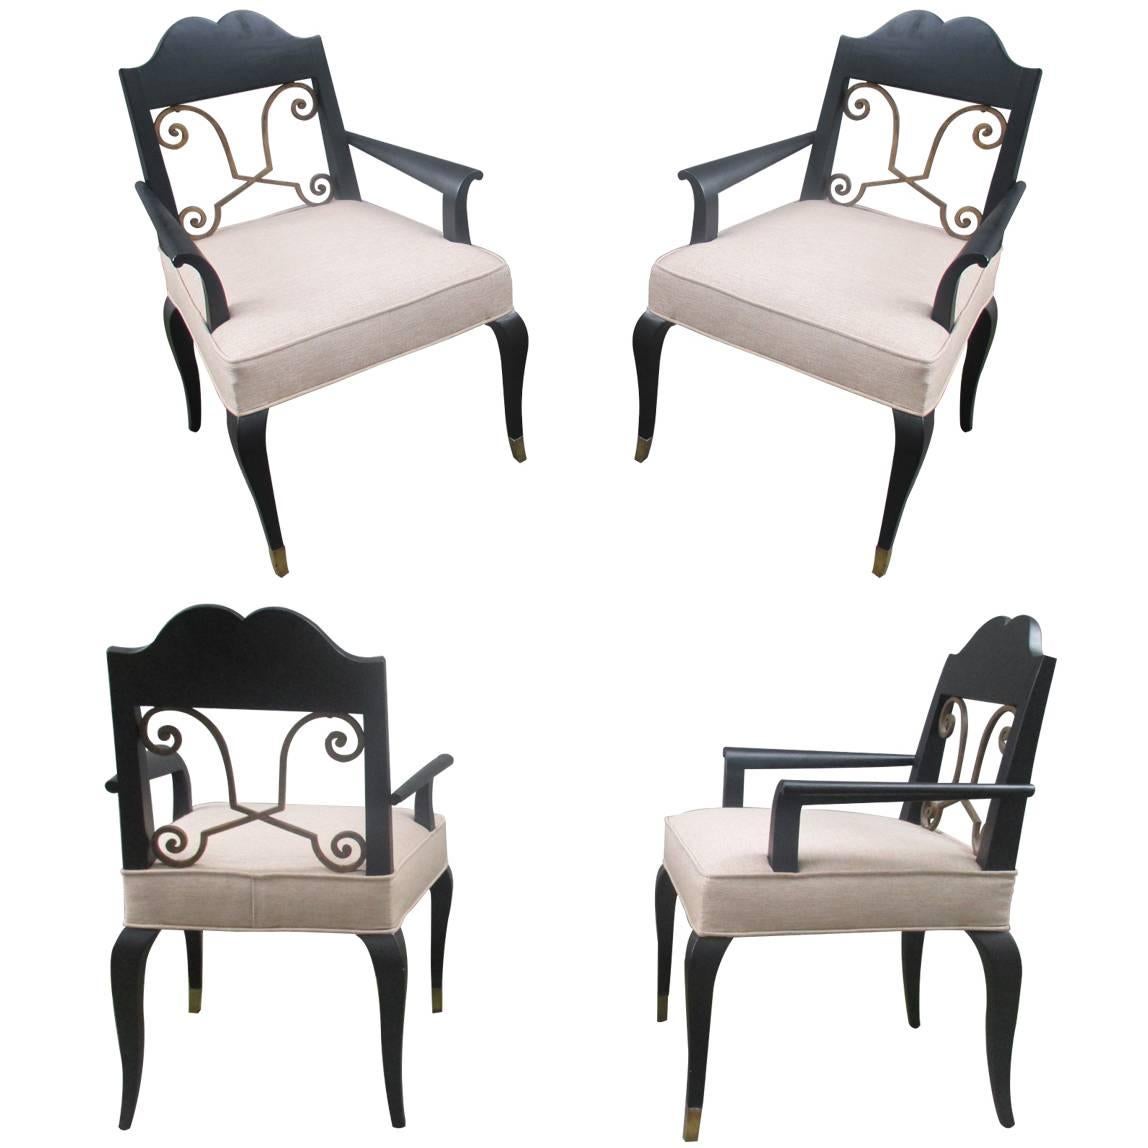 Set of Four Armchairs by Arturo Pani 1950's